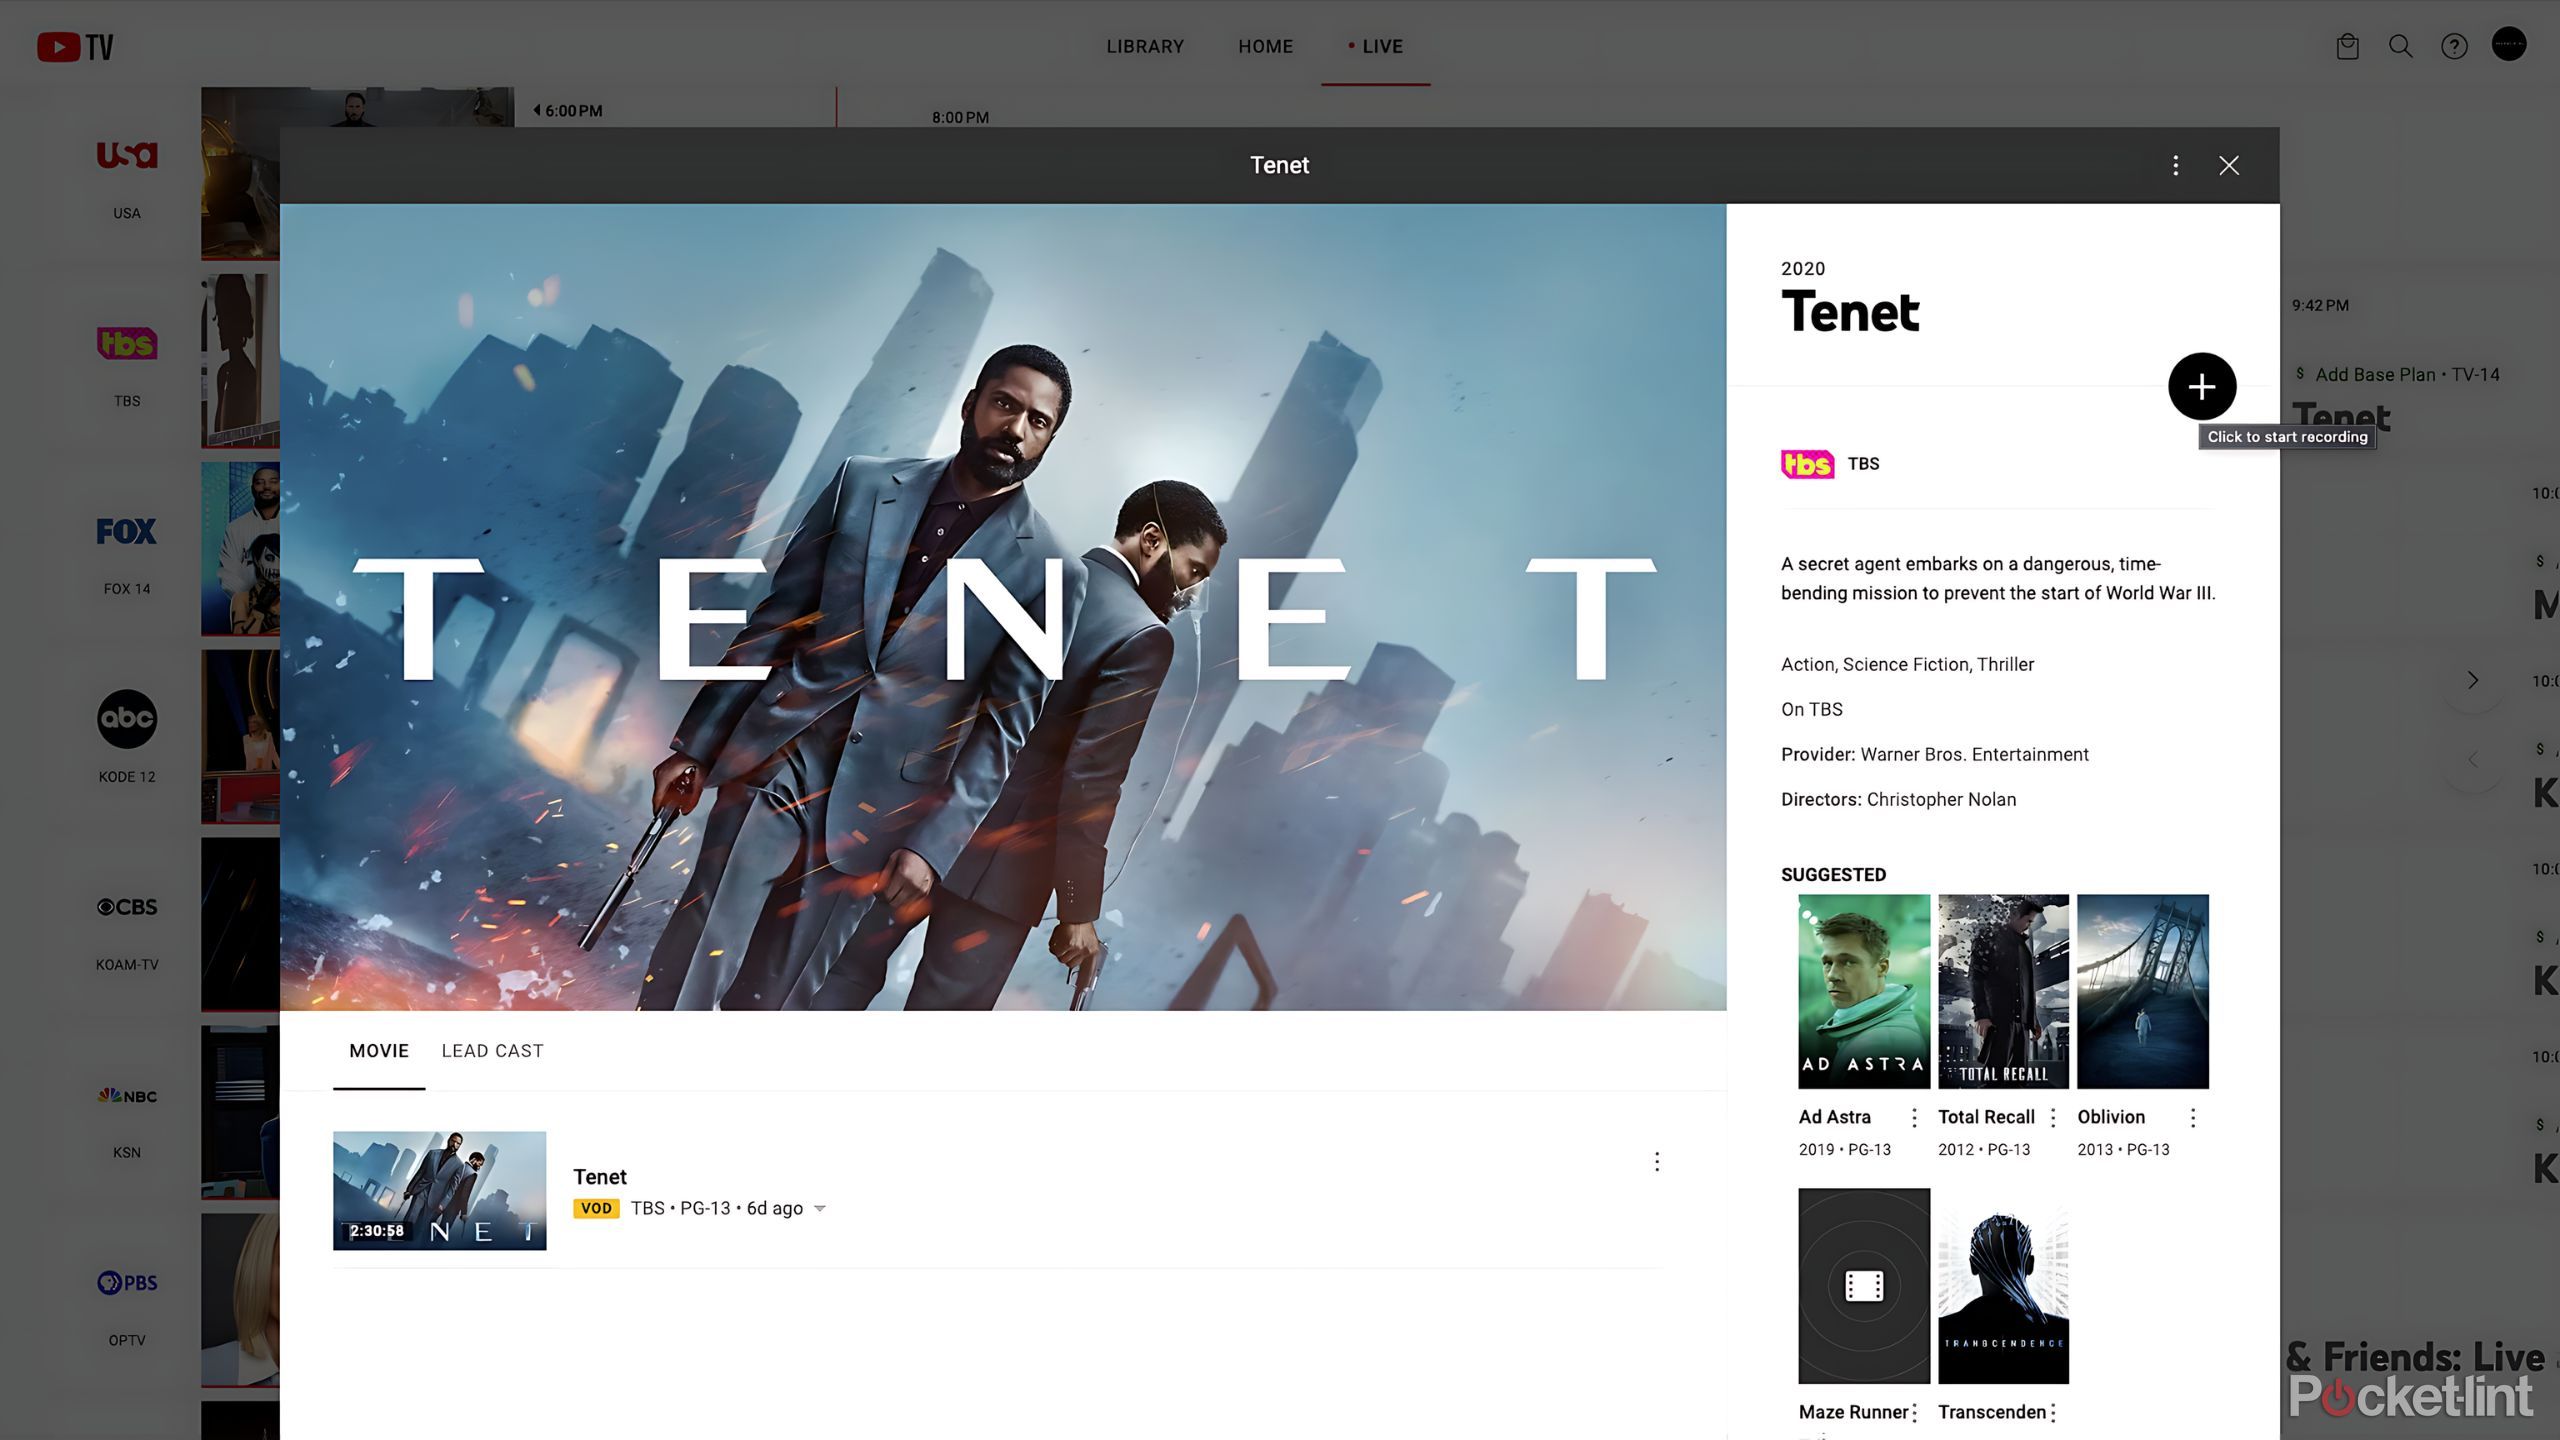 YouTube TV adds the movie 'TENET' to its library options